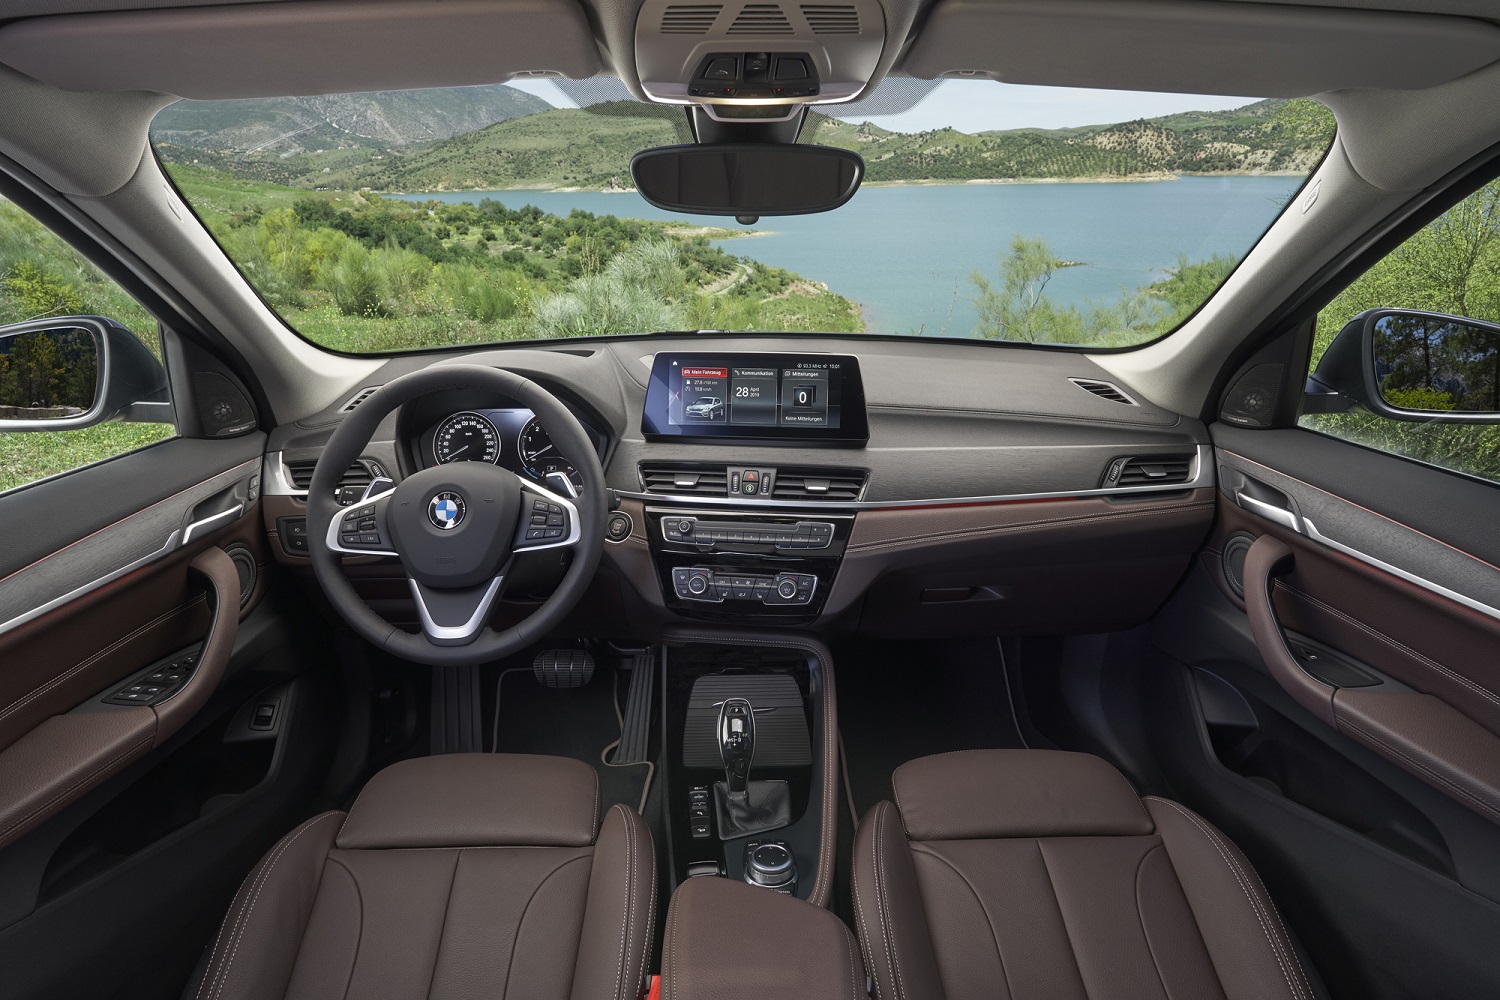 2020 bmw x1 gets new look front end interior upgrades official 8